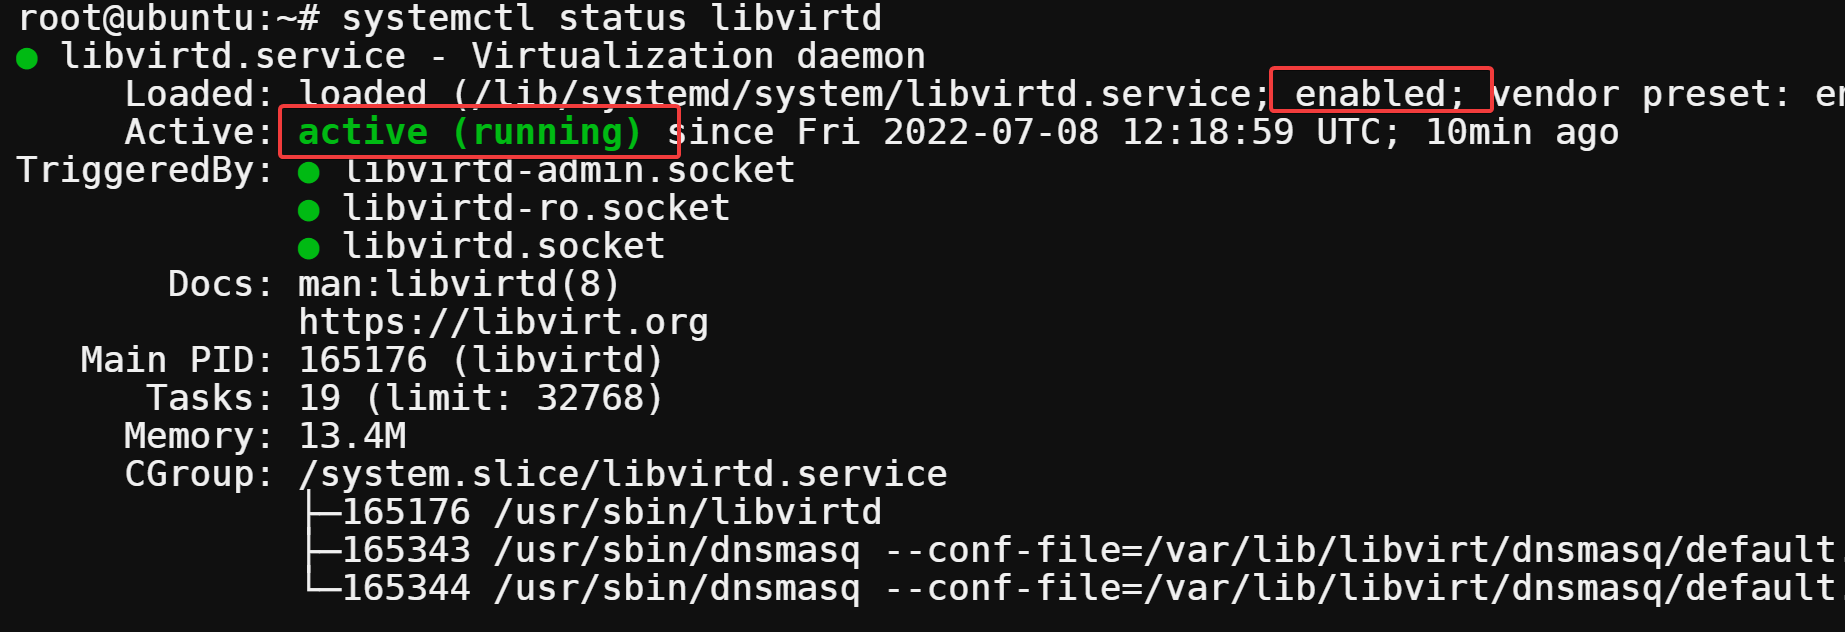 Checking the libvirtd service is running